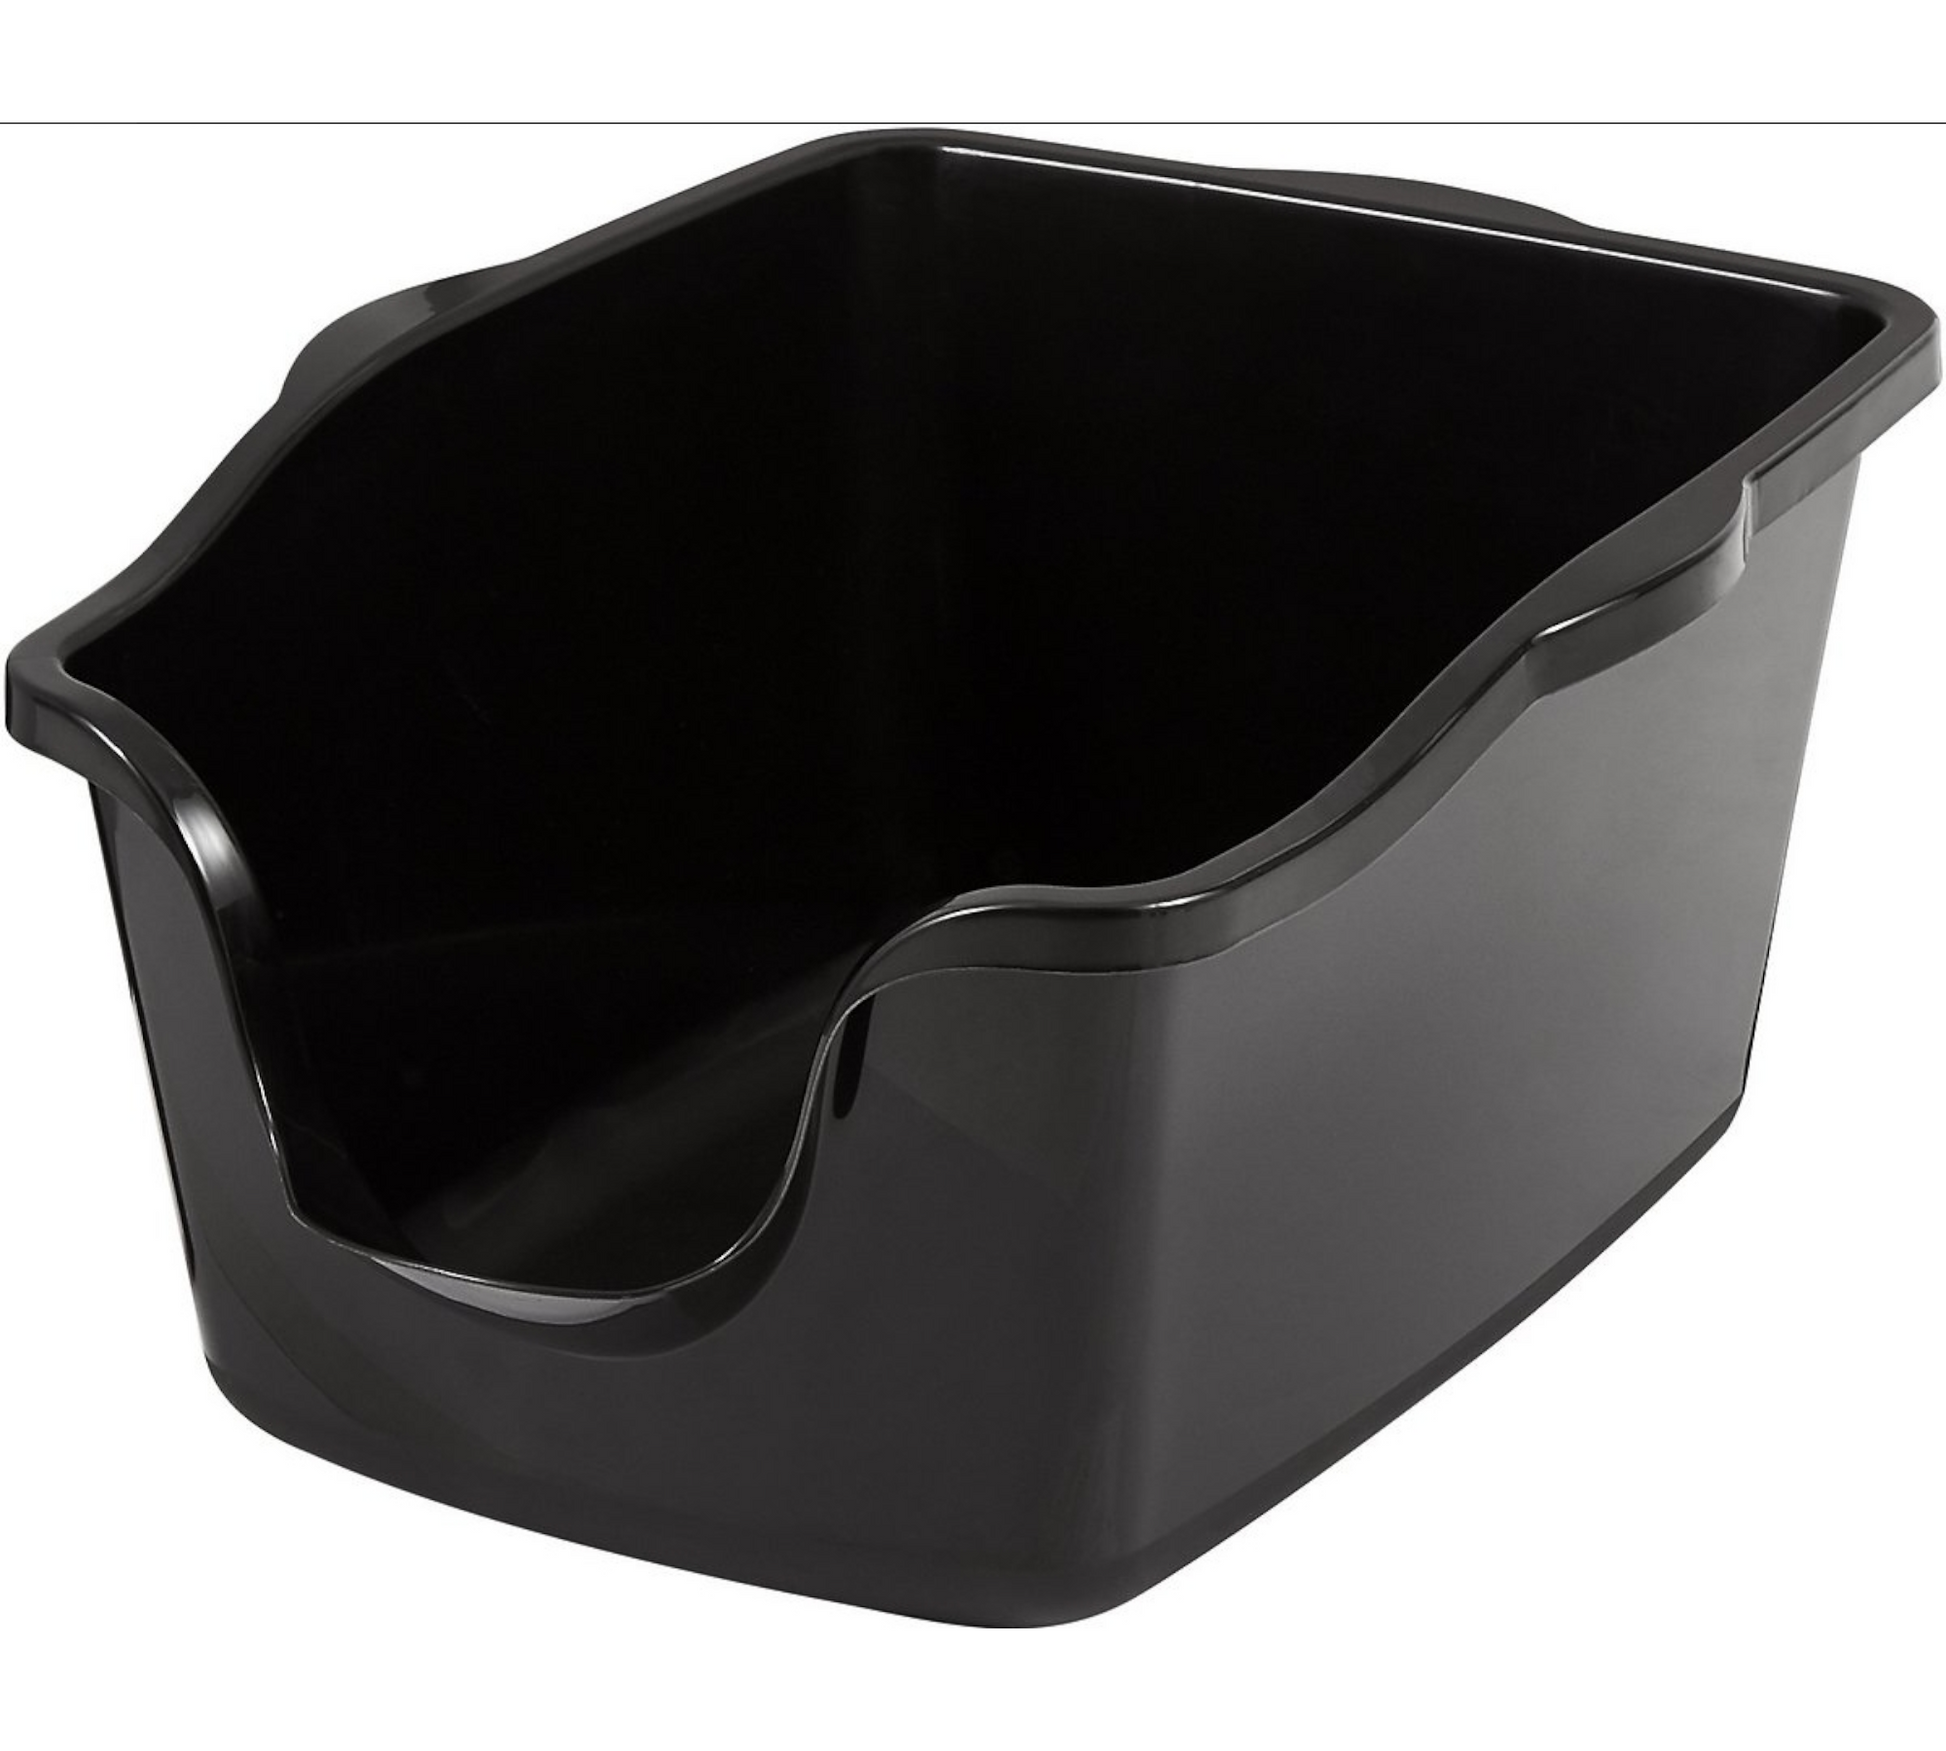 Canine's World Cat Litter Boxes Nature's Miracle High Side Plastic Litter Pan Natures Miracle